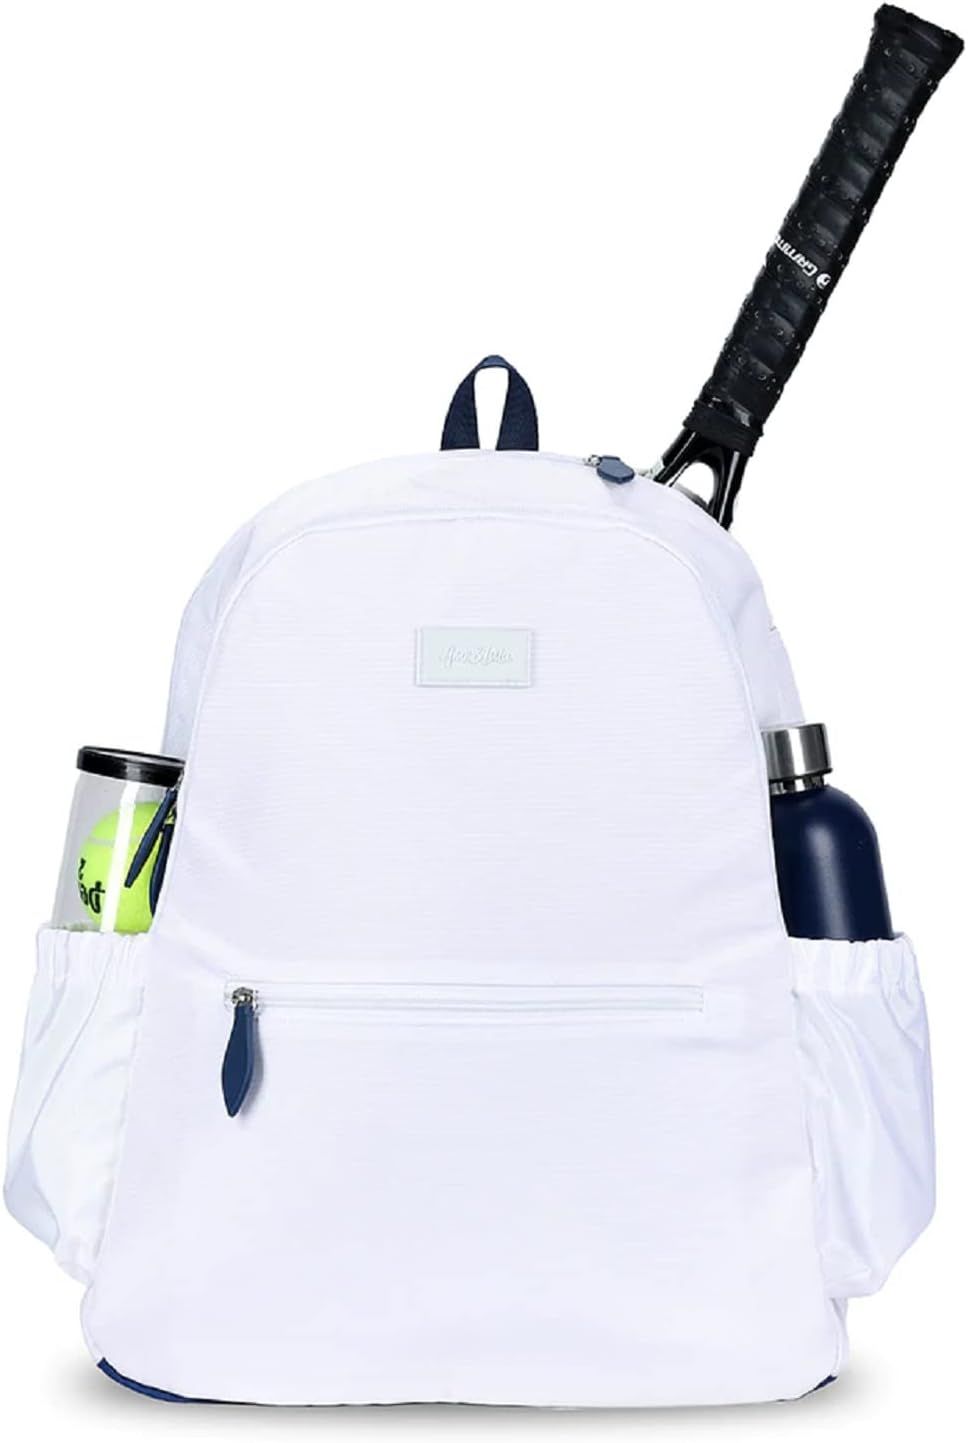 Ame & Lulu Courtside 2.0 Tennis Backpack - Padded & Adjustable Straps - Contains Two Exterior Wat... | Amazon (US)